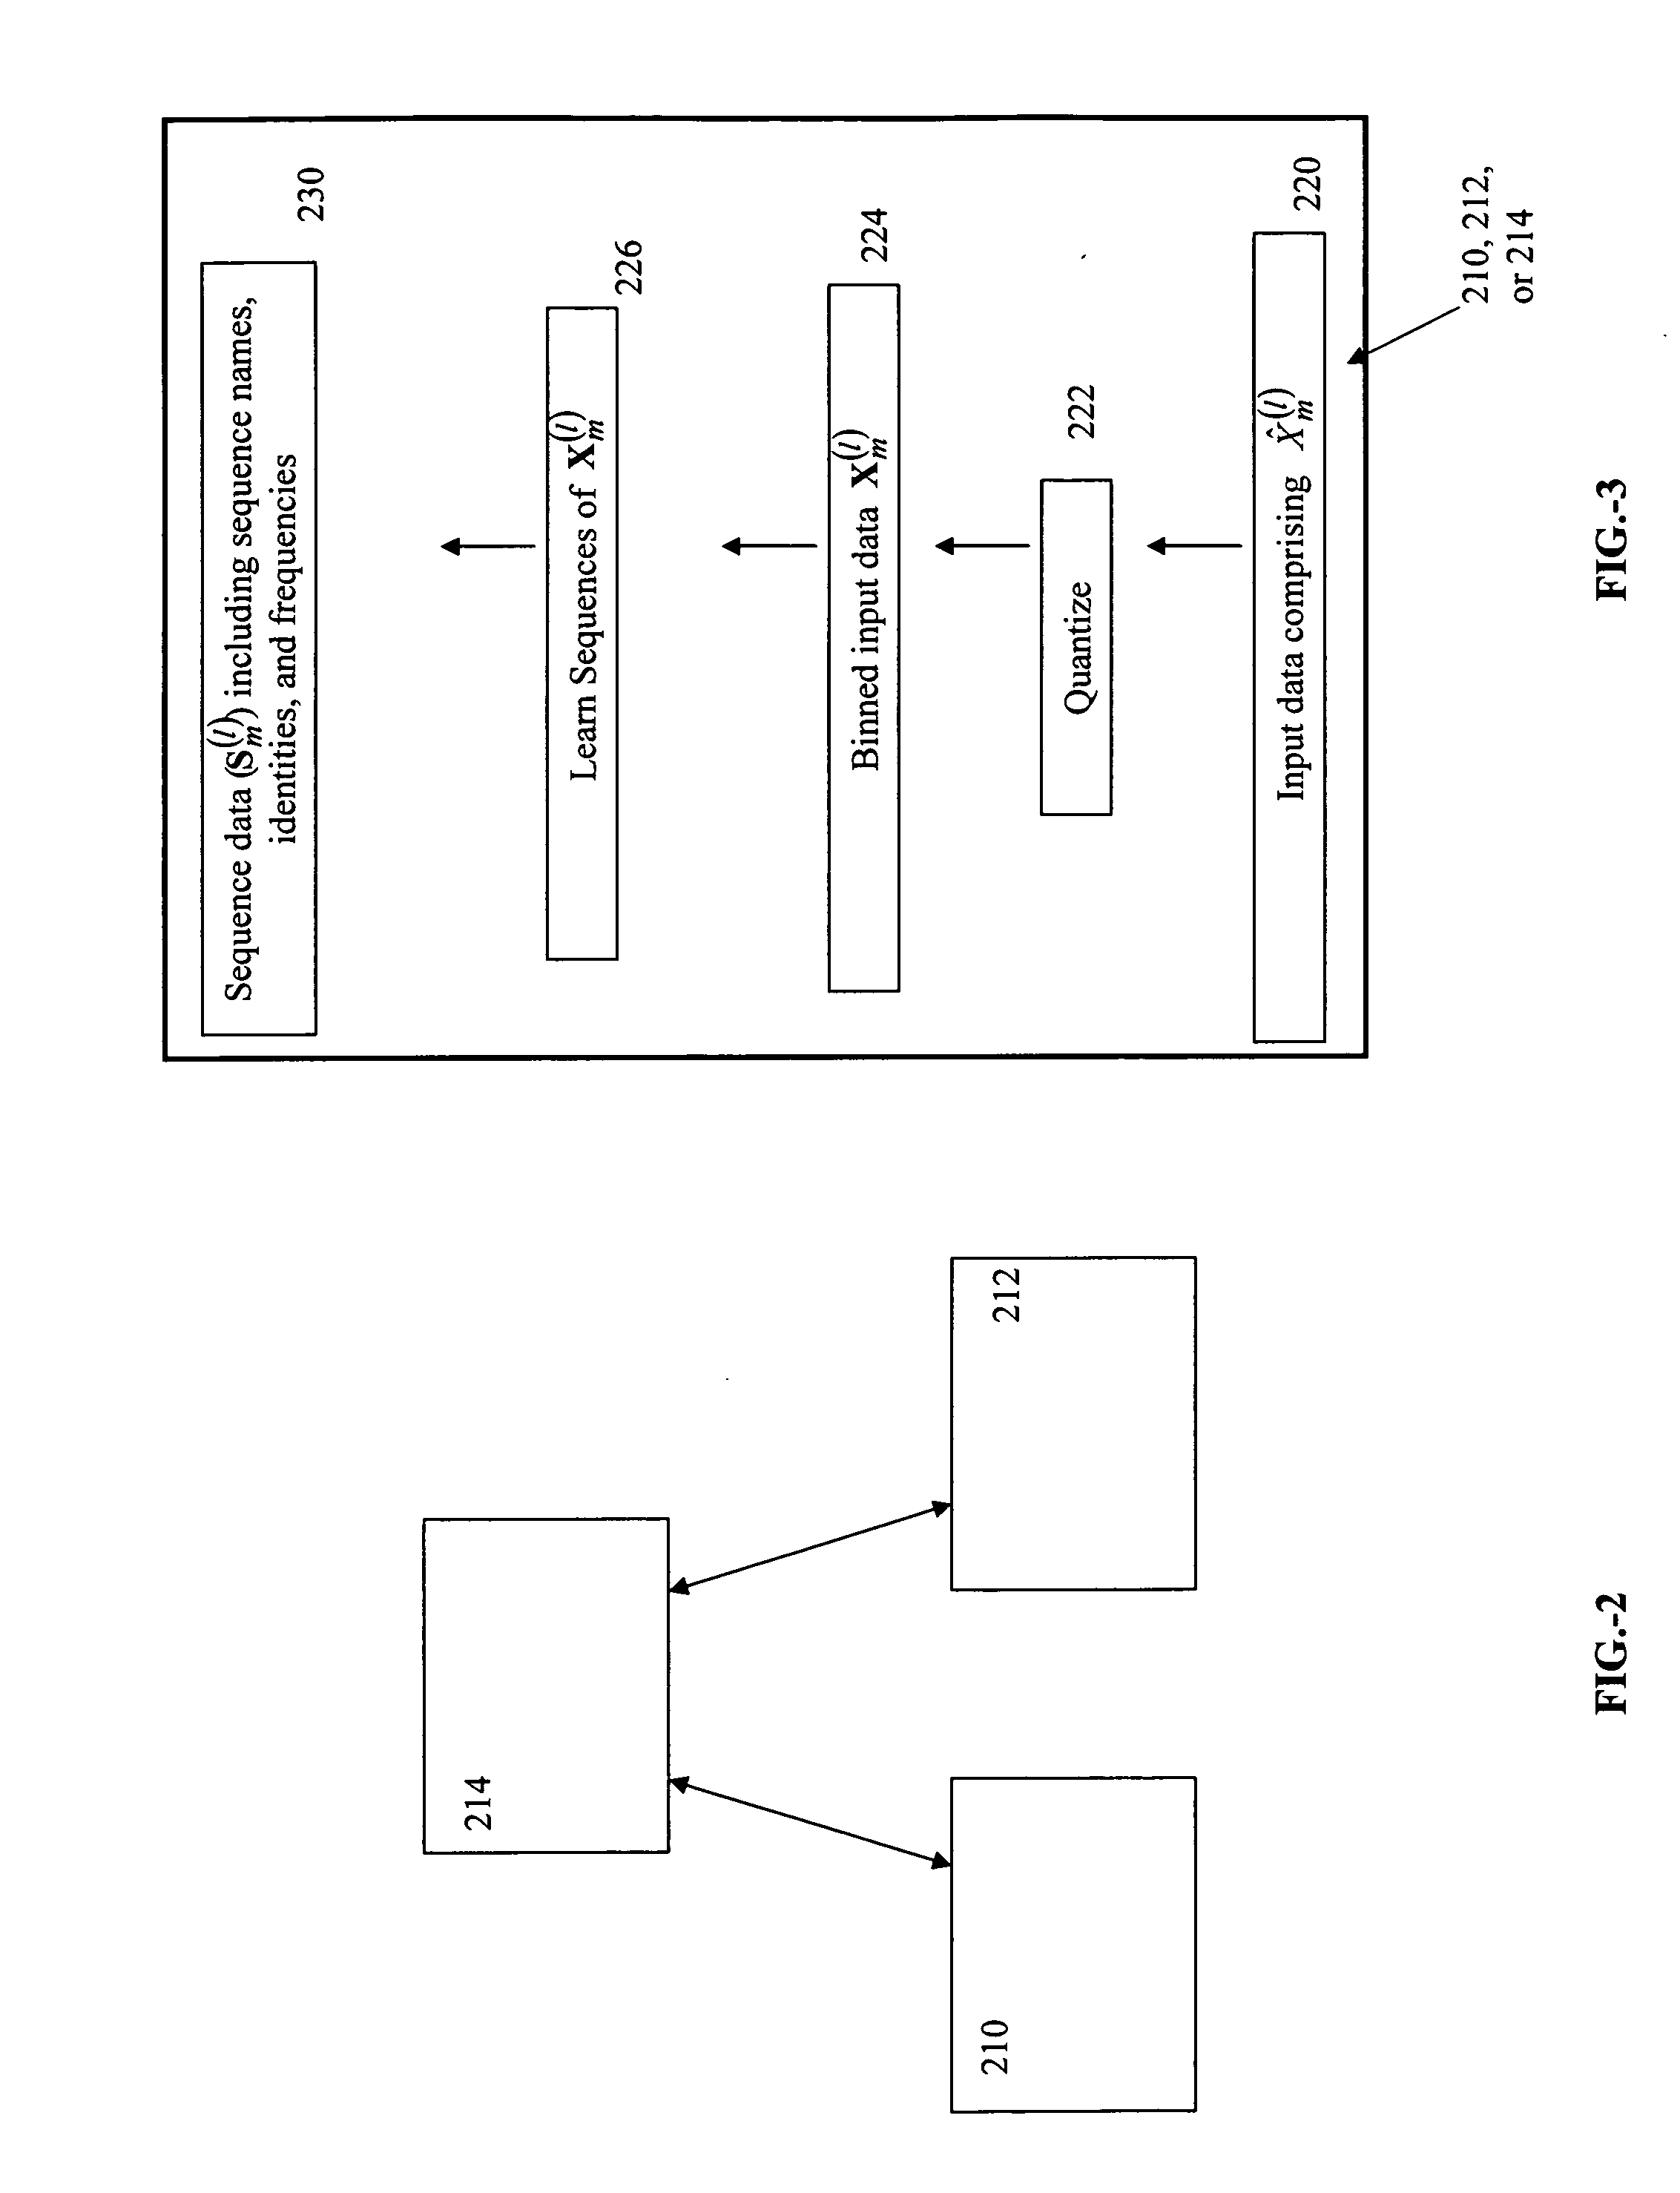 Trainable hierarchical memory system and method